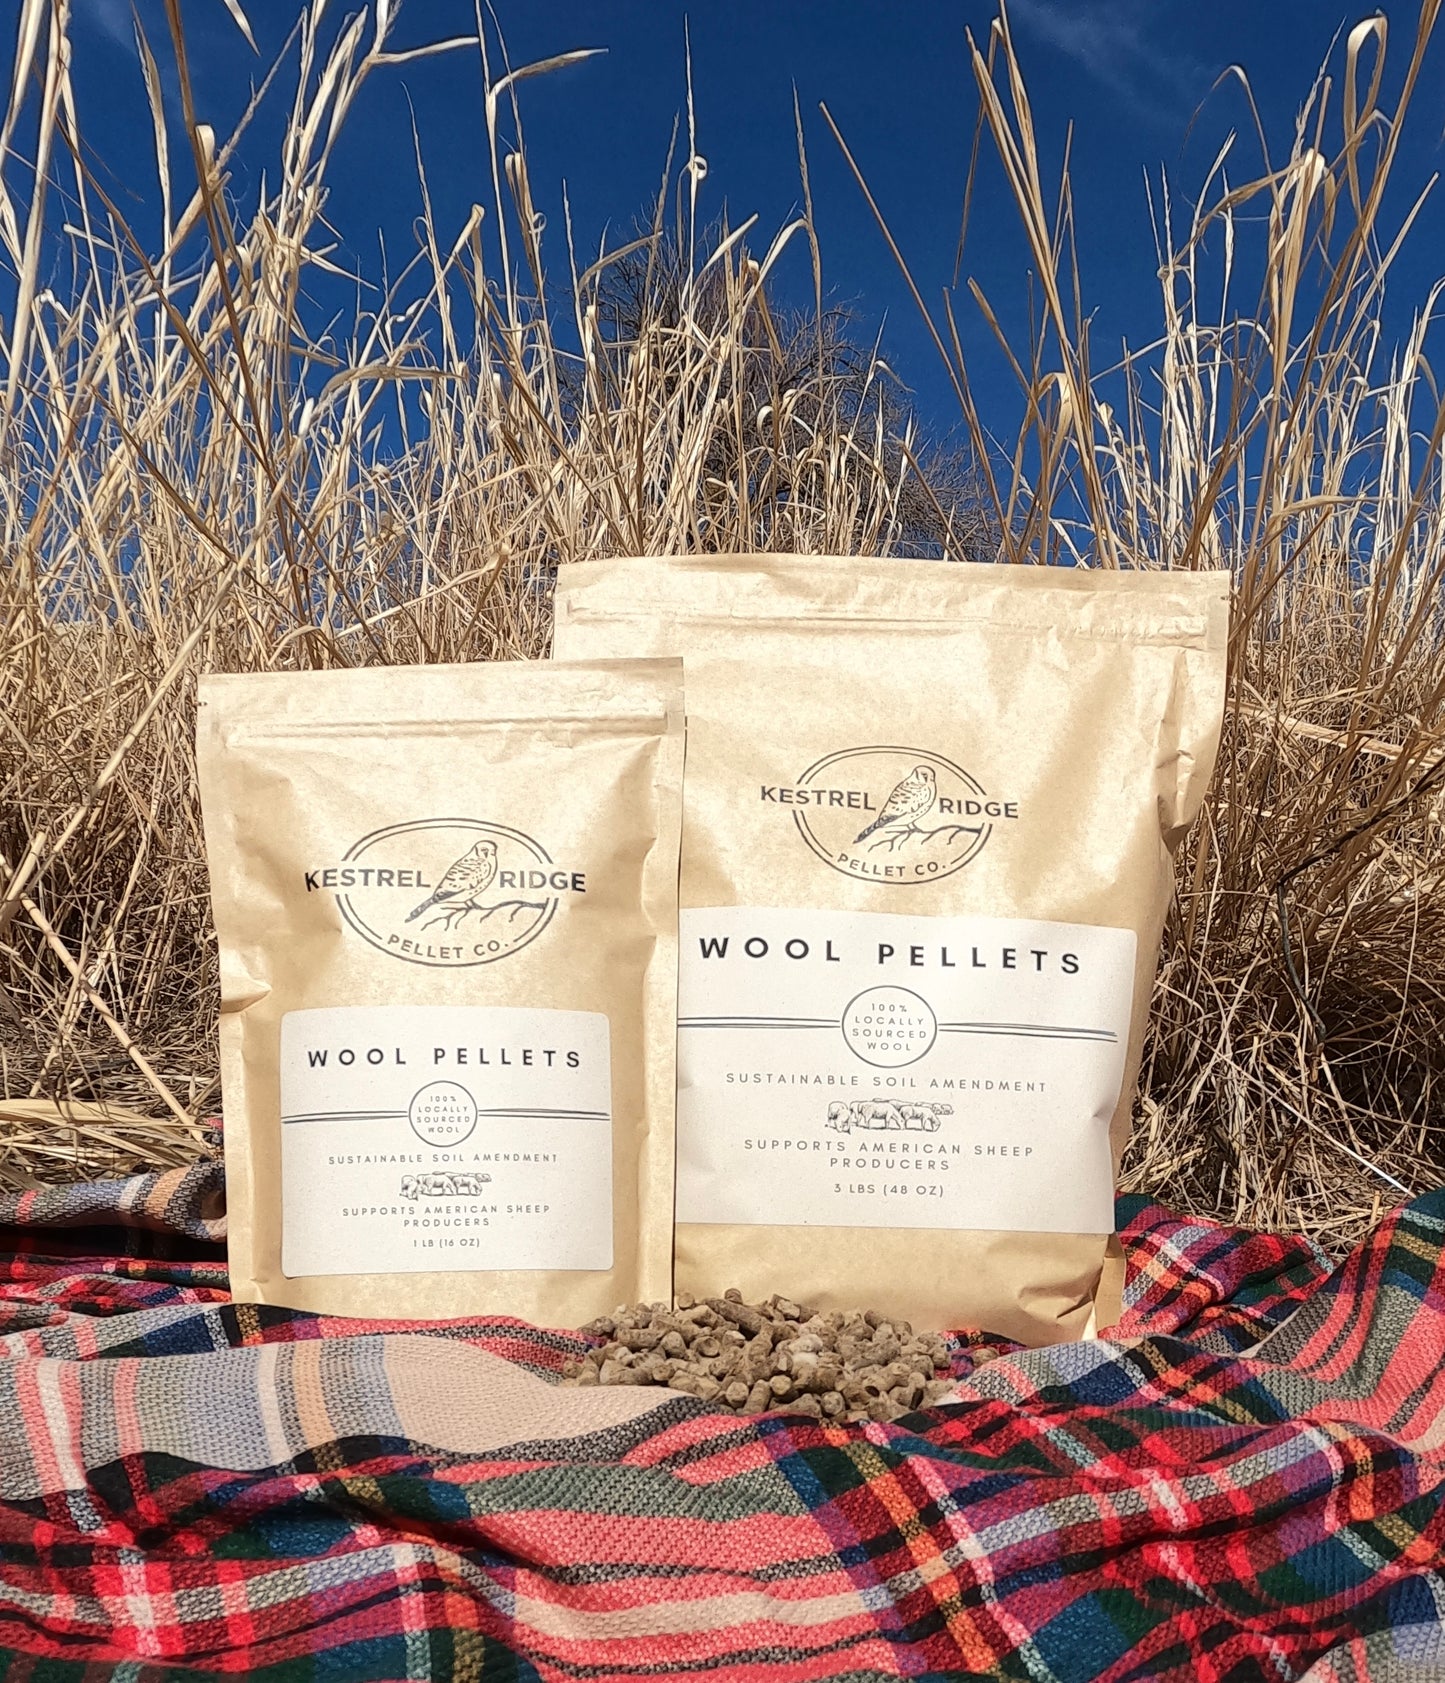 1-pound and 3-pound wool pellet bags with grass in the background